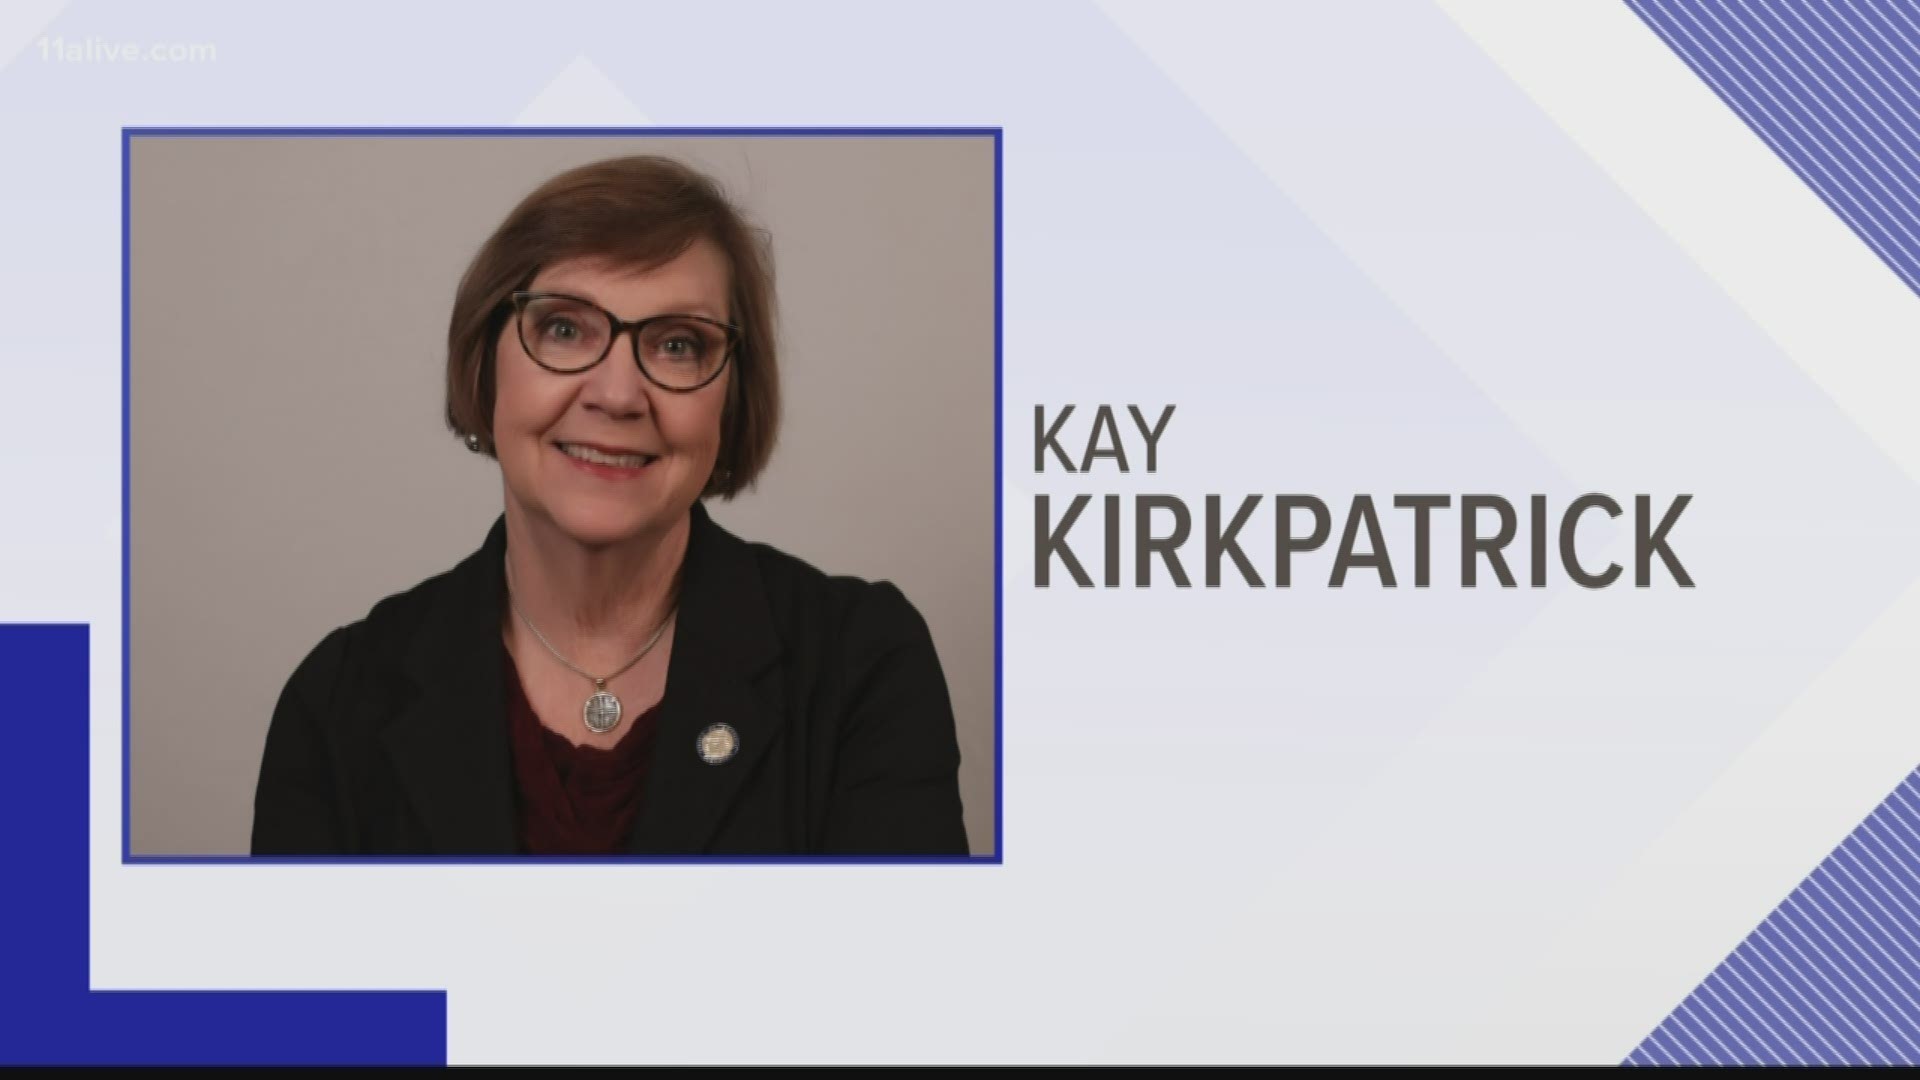 Kay Kirkpatrick said she self-quarantined as soon as she came down with symptoms and called her doctor. She is also a physician.